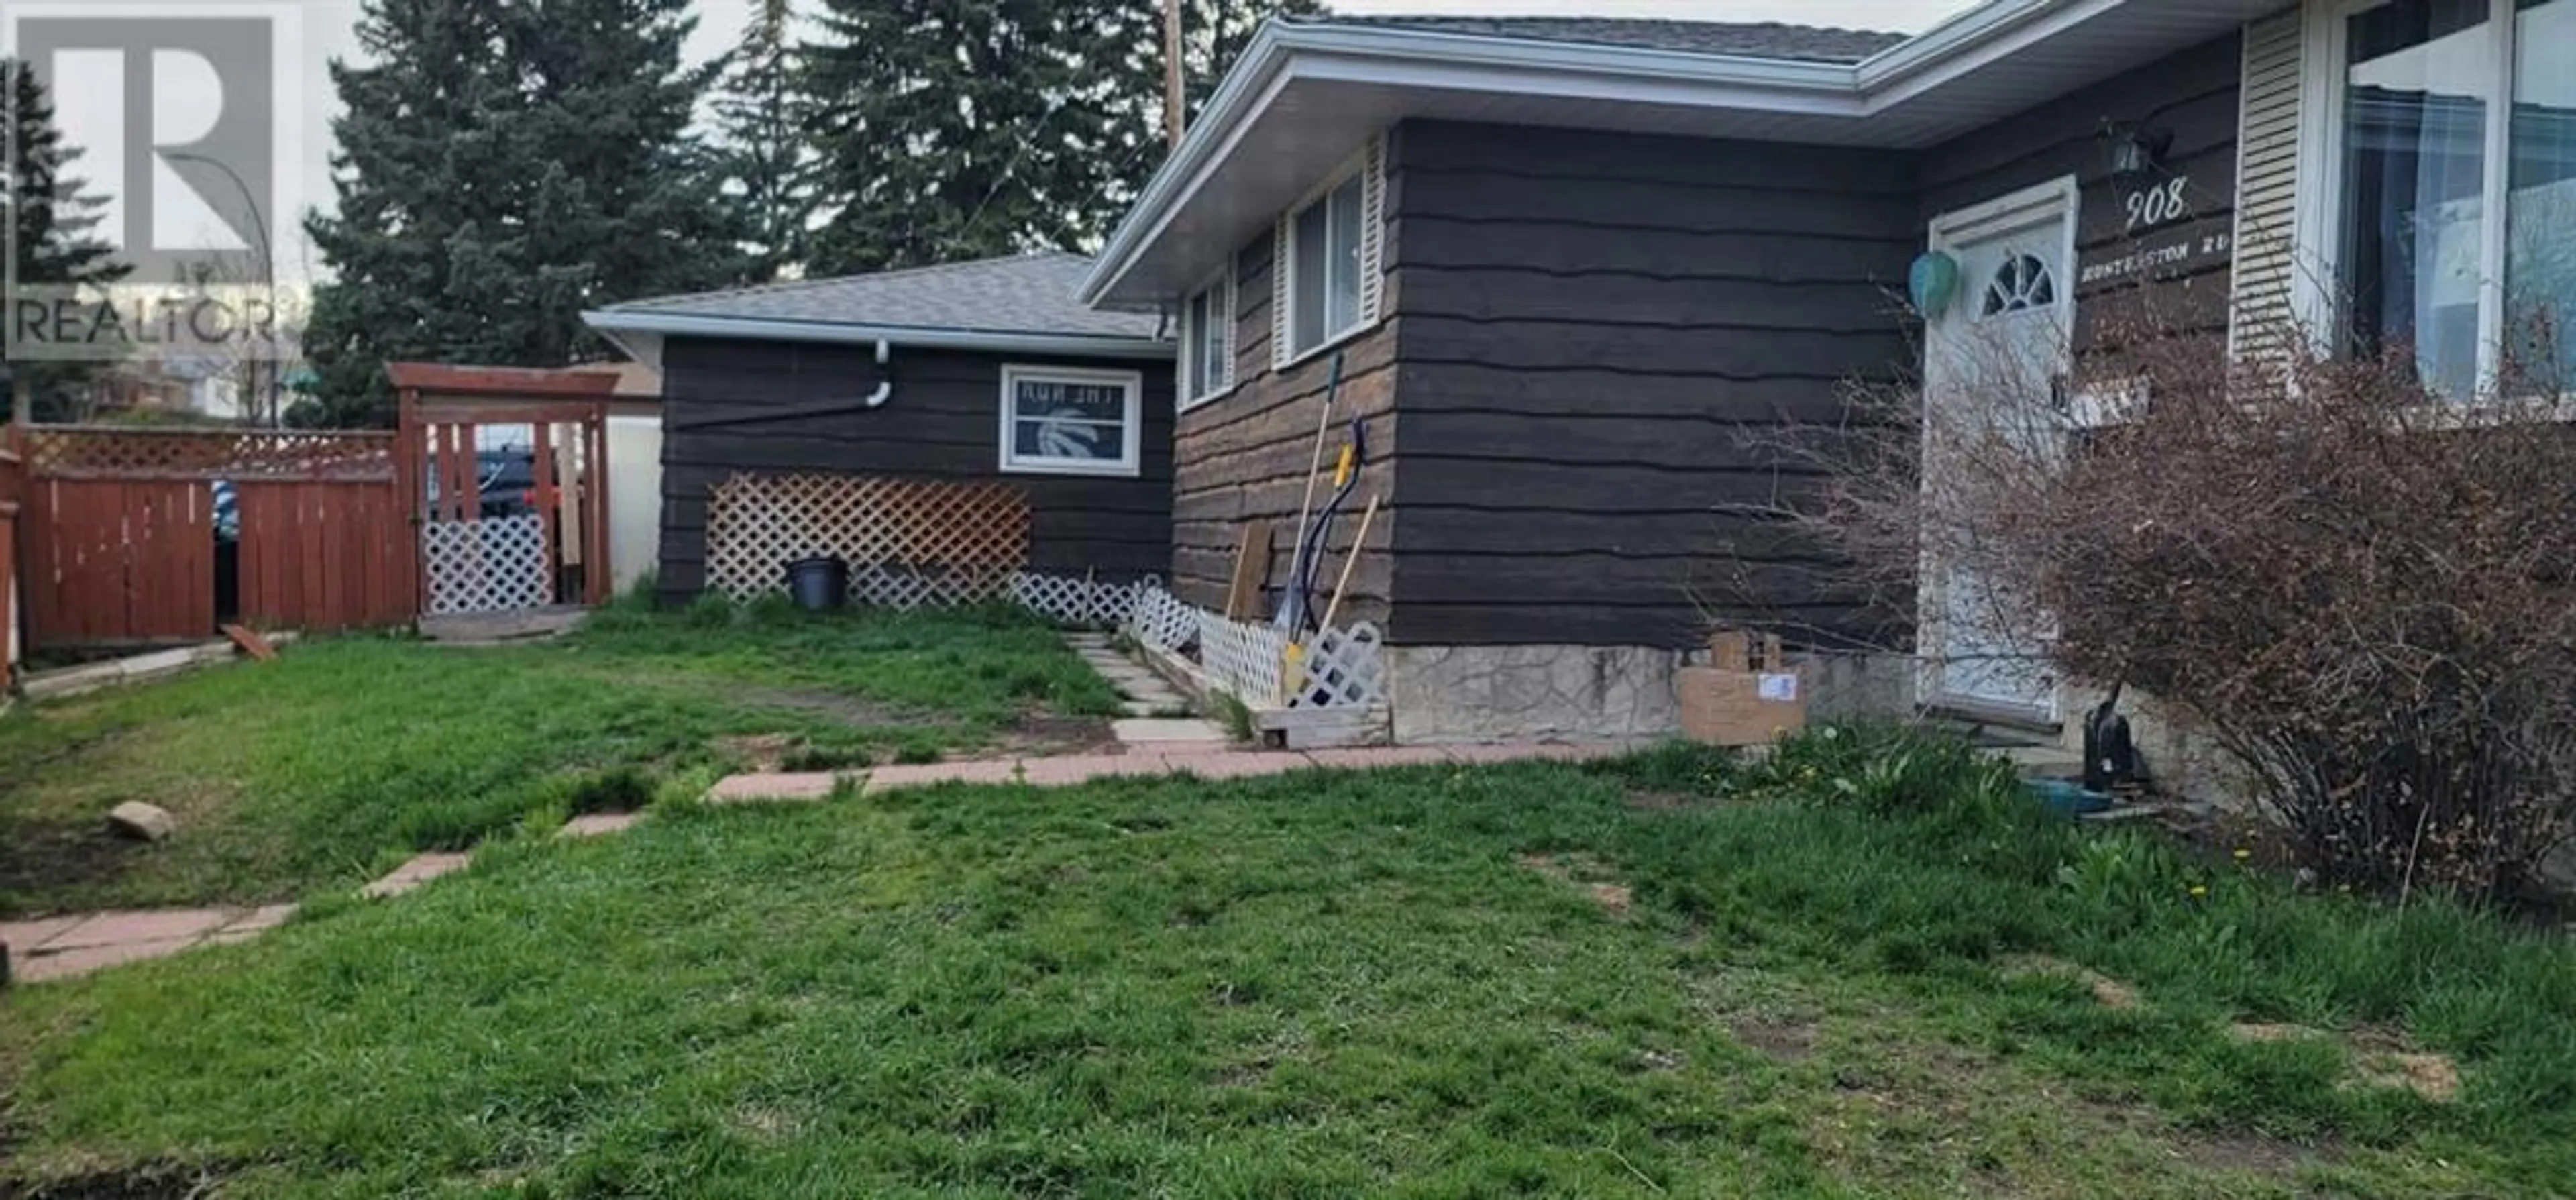 Frontside or backside of a home for 908 Hunterston Road NW, Calgary Alberta T2K4M7